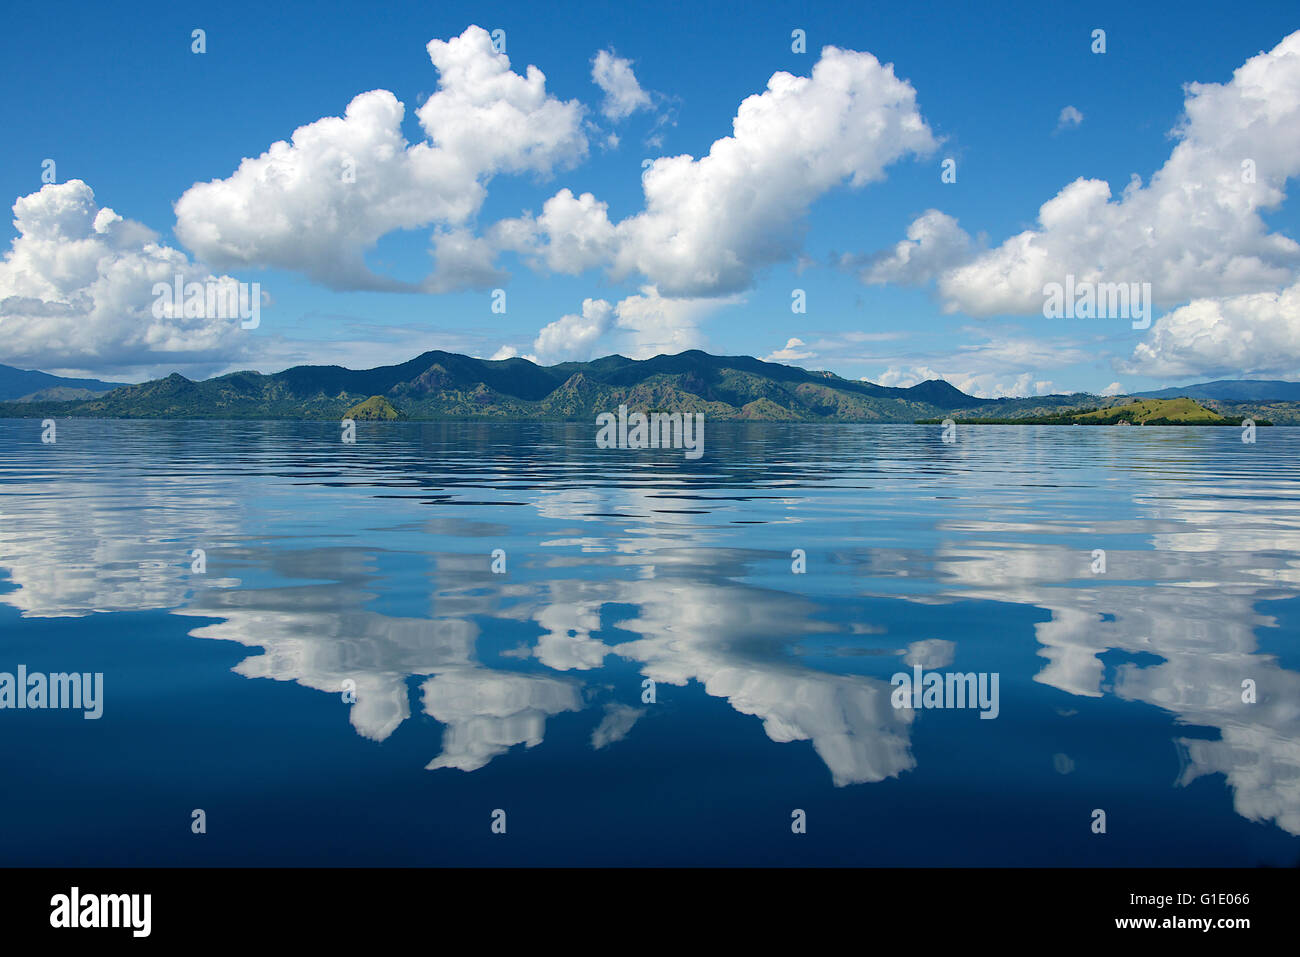 Clouds over Rinca Island reflected in calm sea Komodo National Park Indonesia Stock Photo